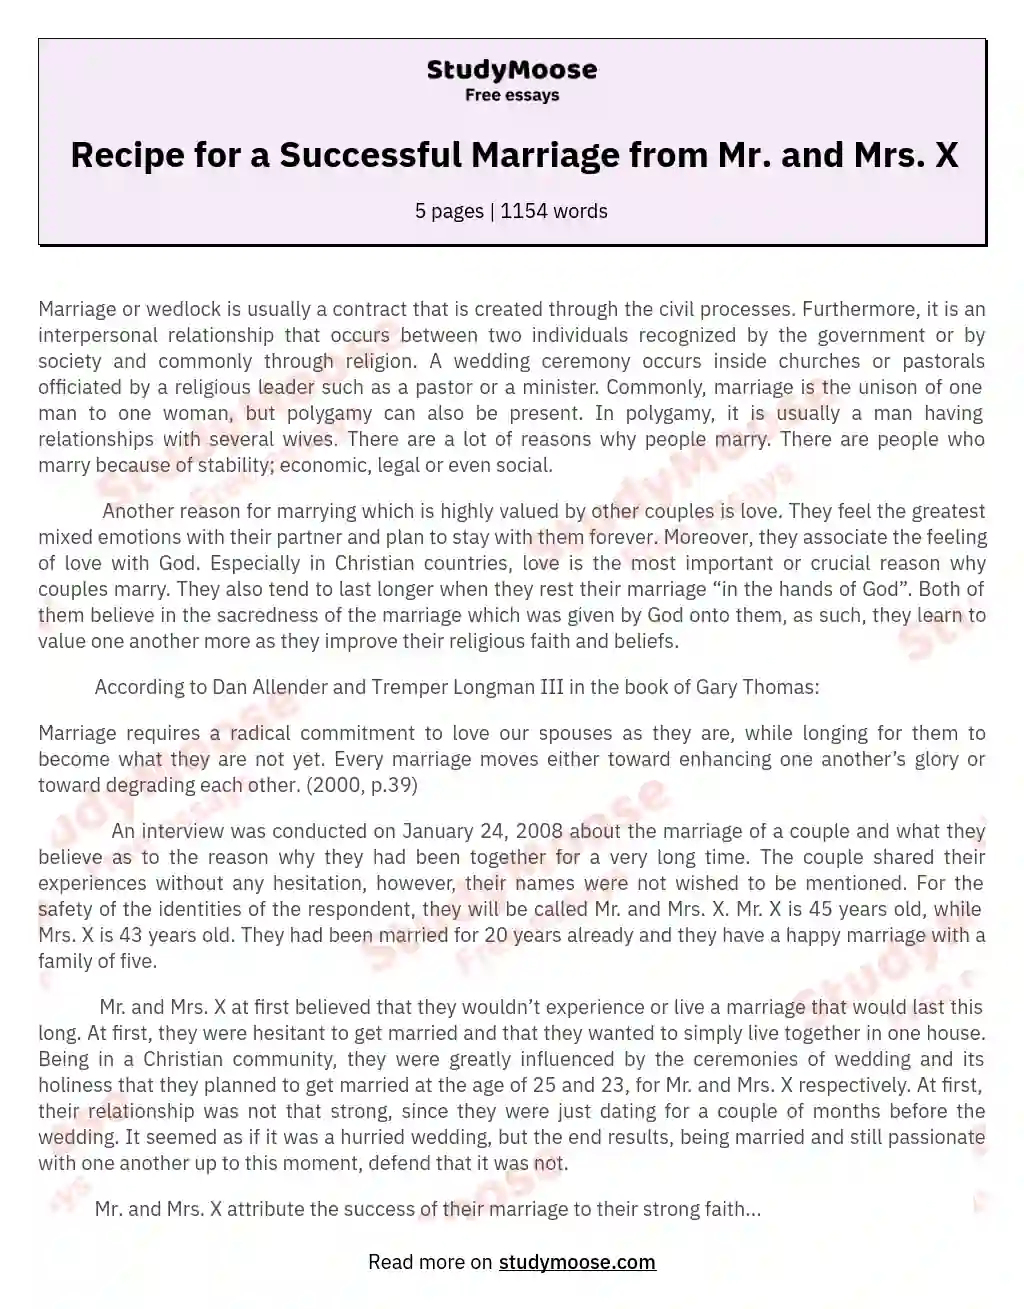 argumentative essay about early marriage